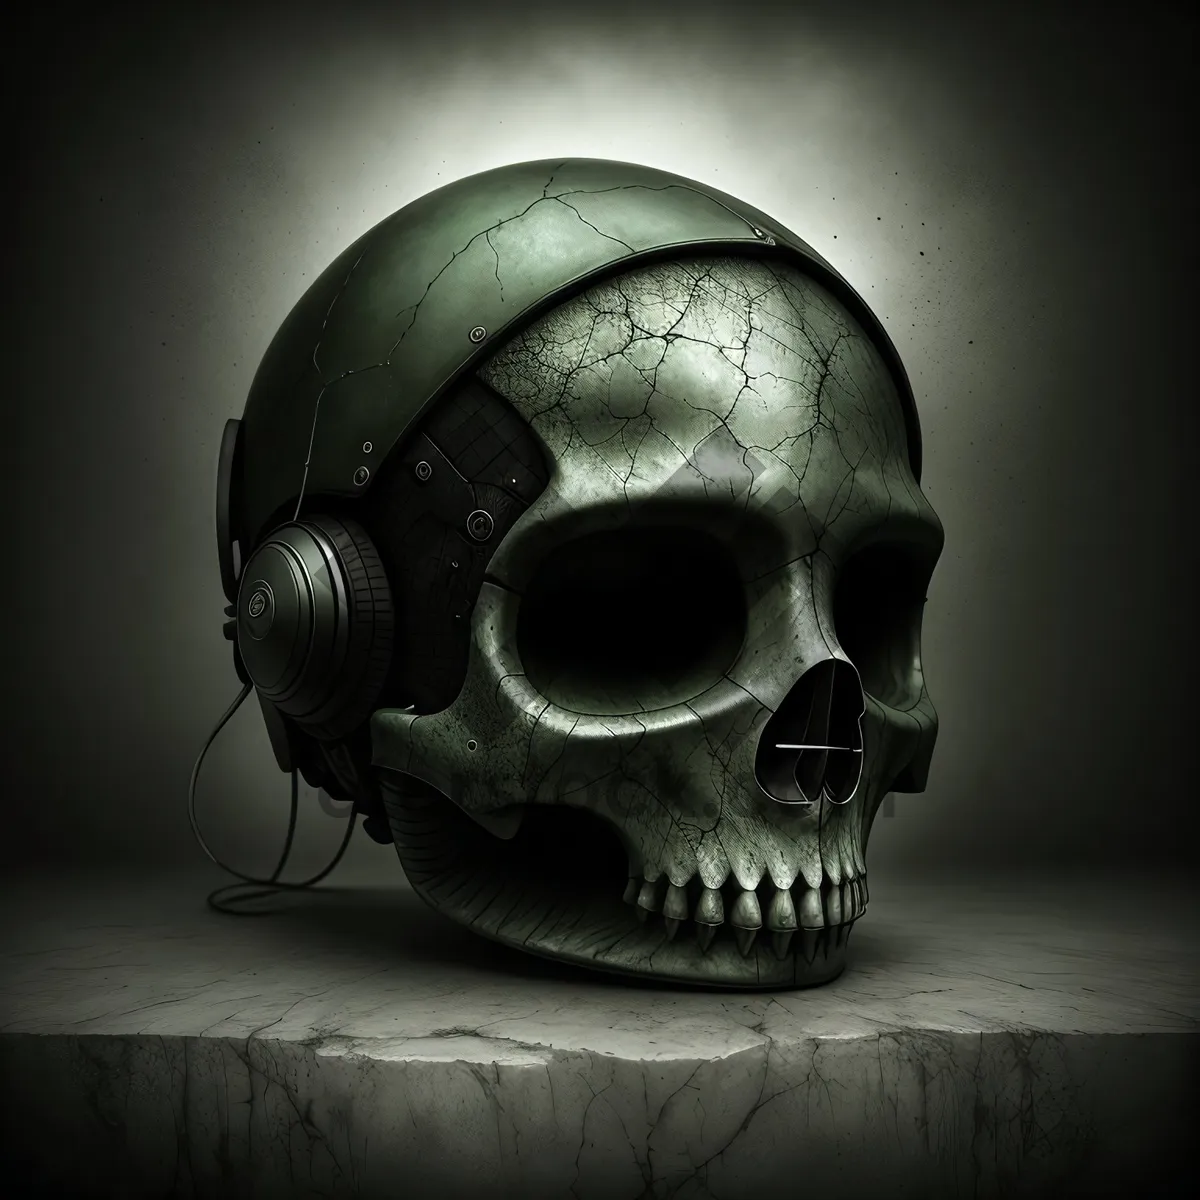 Picture of Skull Helmet: Deathly Protective Headgear and Pencil Sharpener